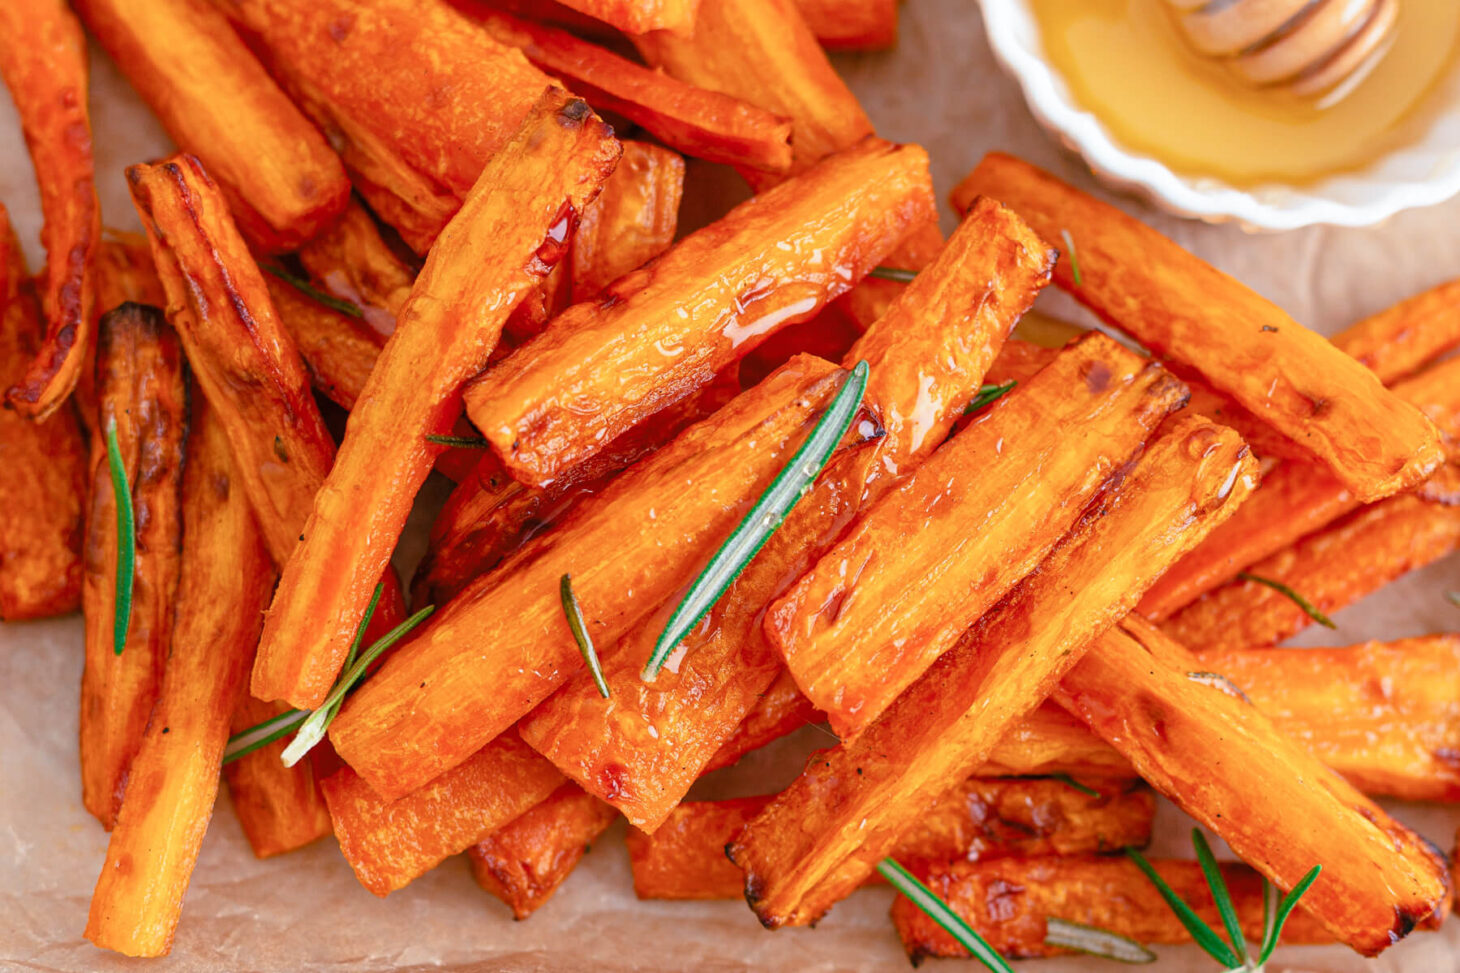 Perfectly roasted air fryer carrots on a parchment lined tray with rosemary and a small dish of honey.